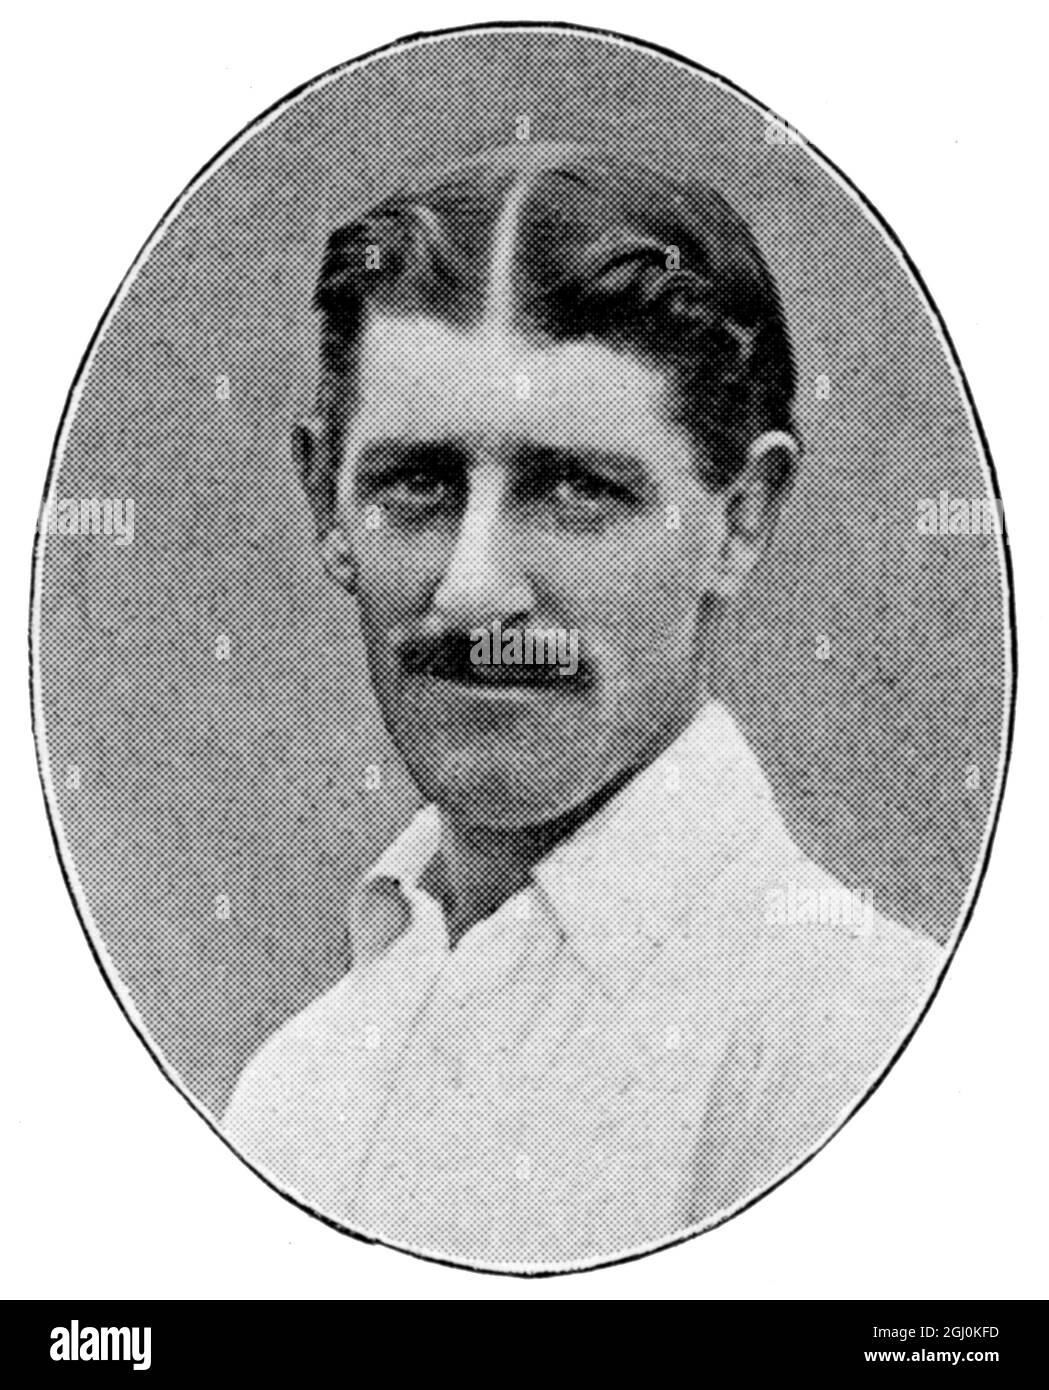 Mr A. H. Hornby - County Cricket player for Lancashire Albert Neilson Hornby (Blackburn, Lancashire, 10 February 1847 - 17 December 1925 in Nantwich, Cheshire) was the England cricket captain who lost the Test match which gave rise to the Ashes, at home against the Australians in 1882. Stock Photo